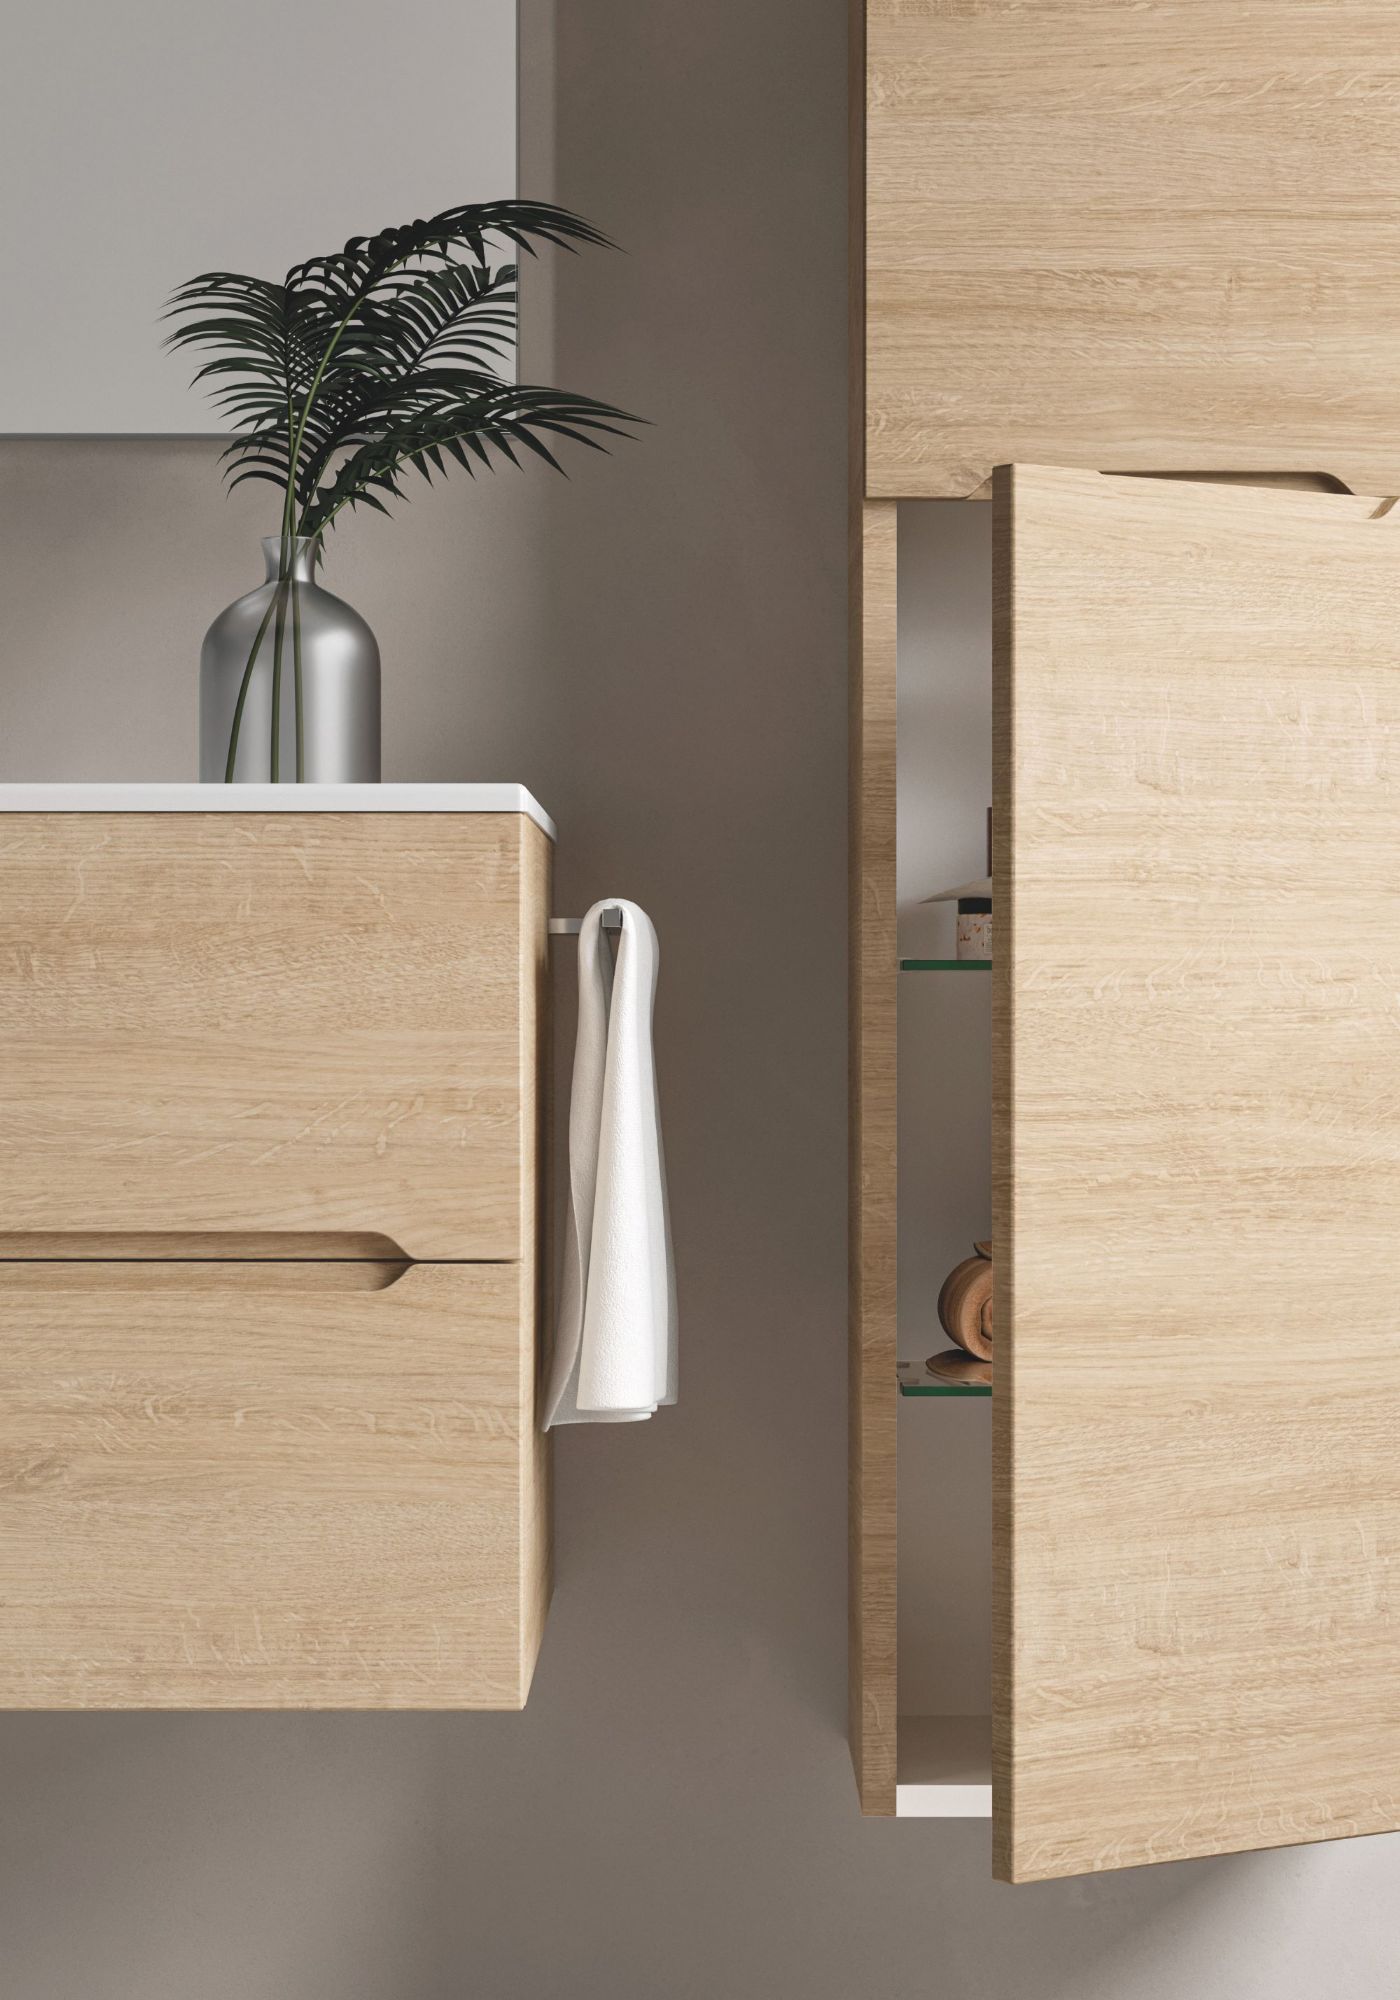 Smyle vanity unit in LB 004 wood finish with ceramic top and integrated twin basins, plus matching column cabinet.